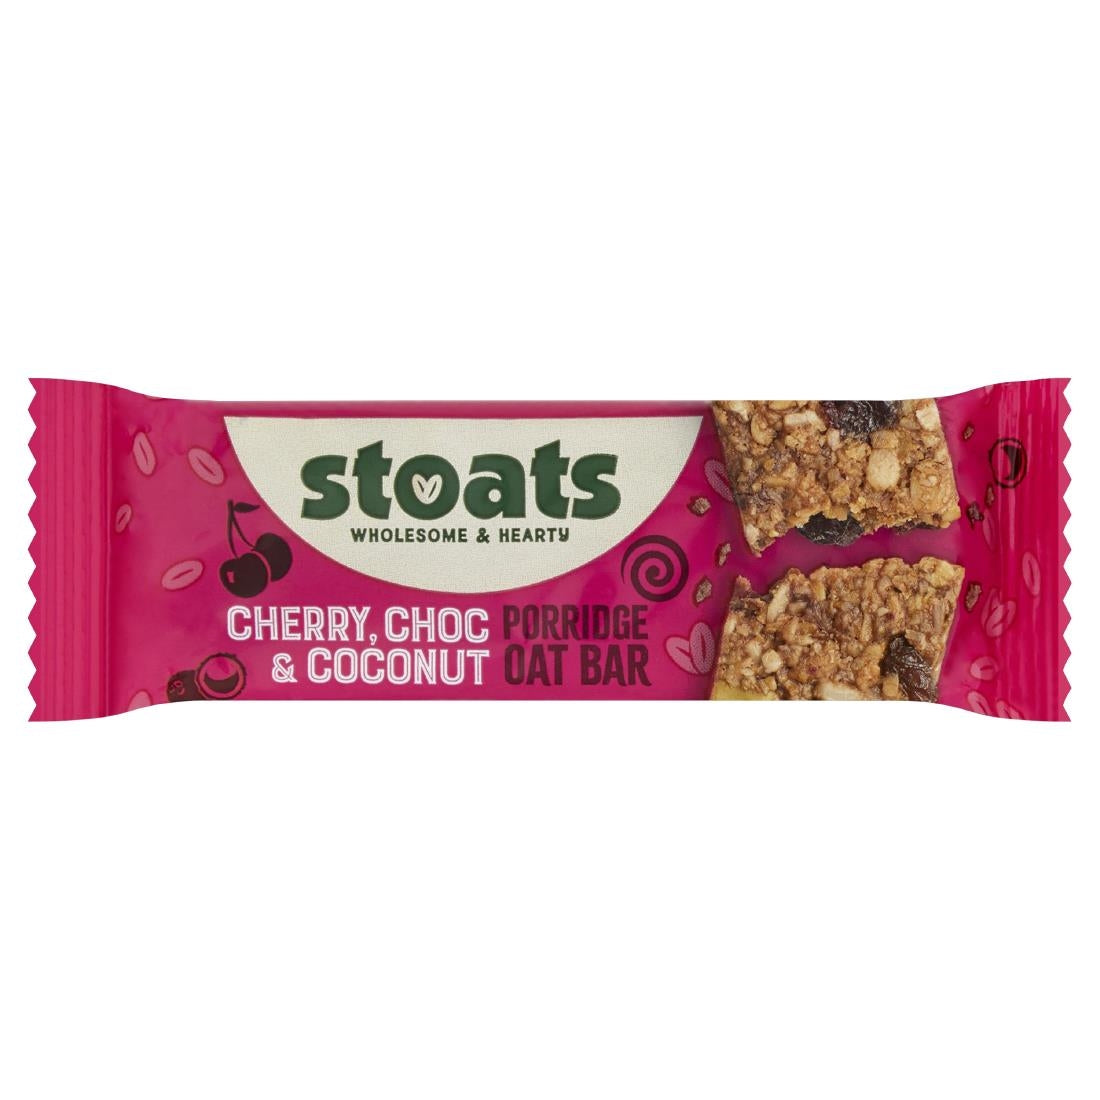 HS860 Stoats Cherry, Choc & Coconut Oat Bars 42g (Pack of 24)